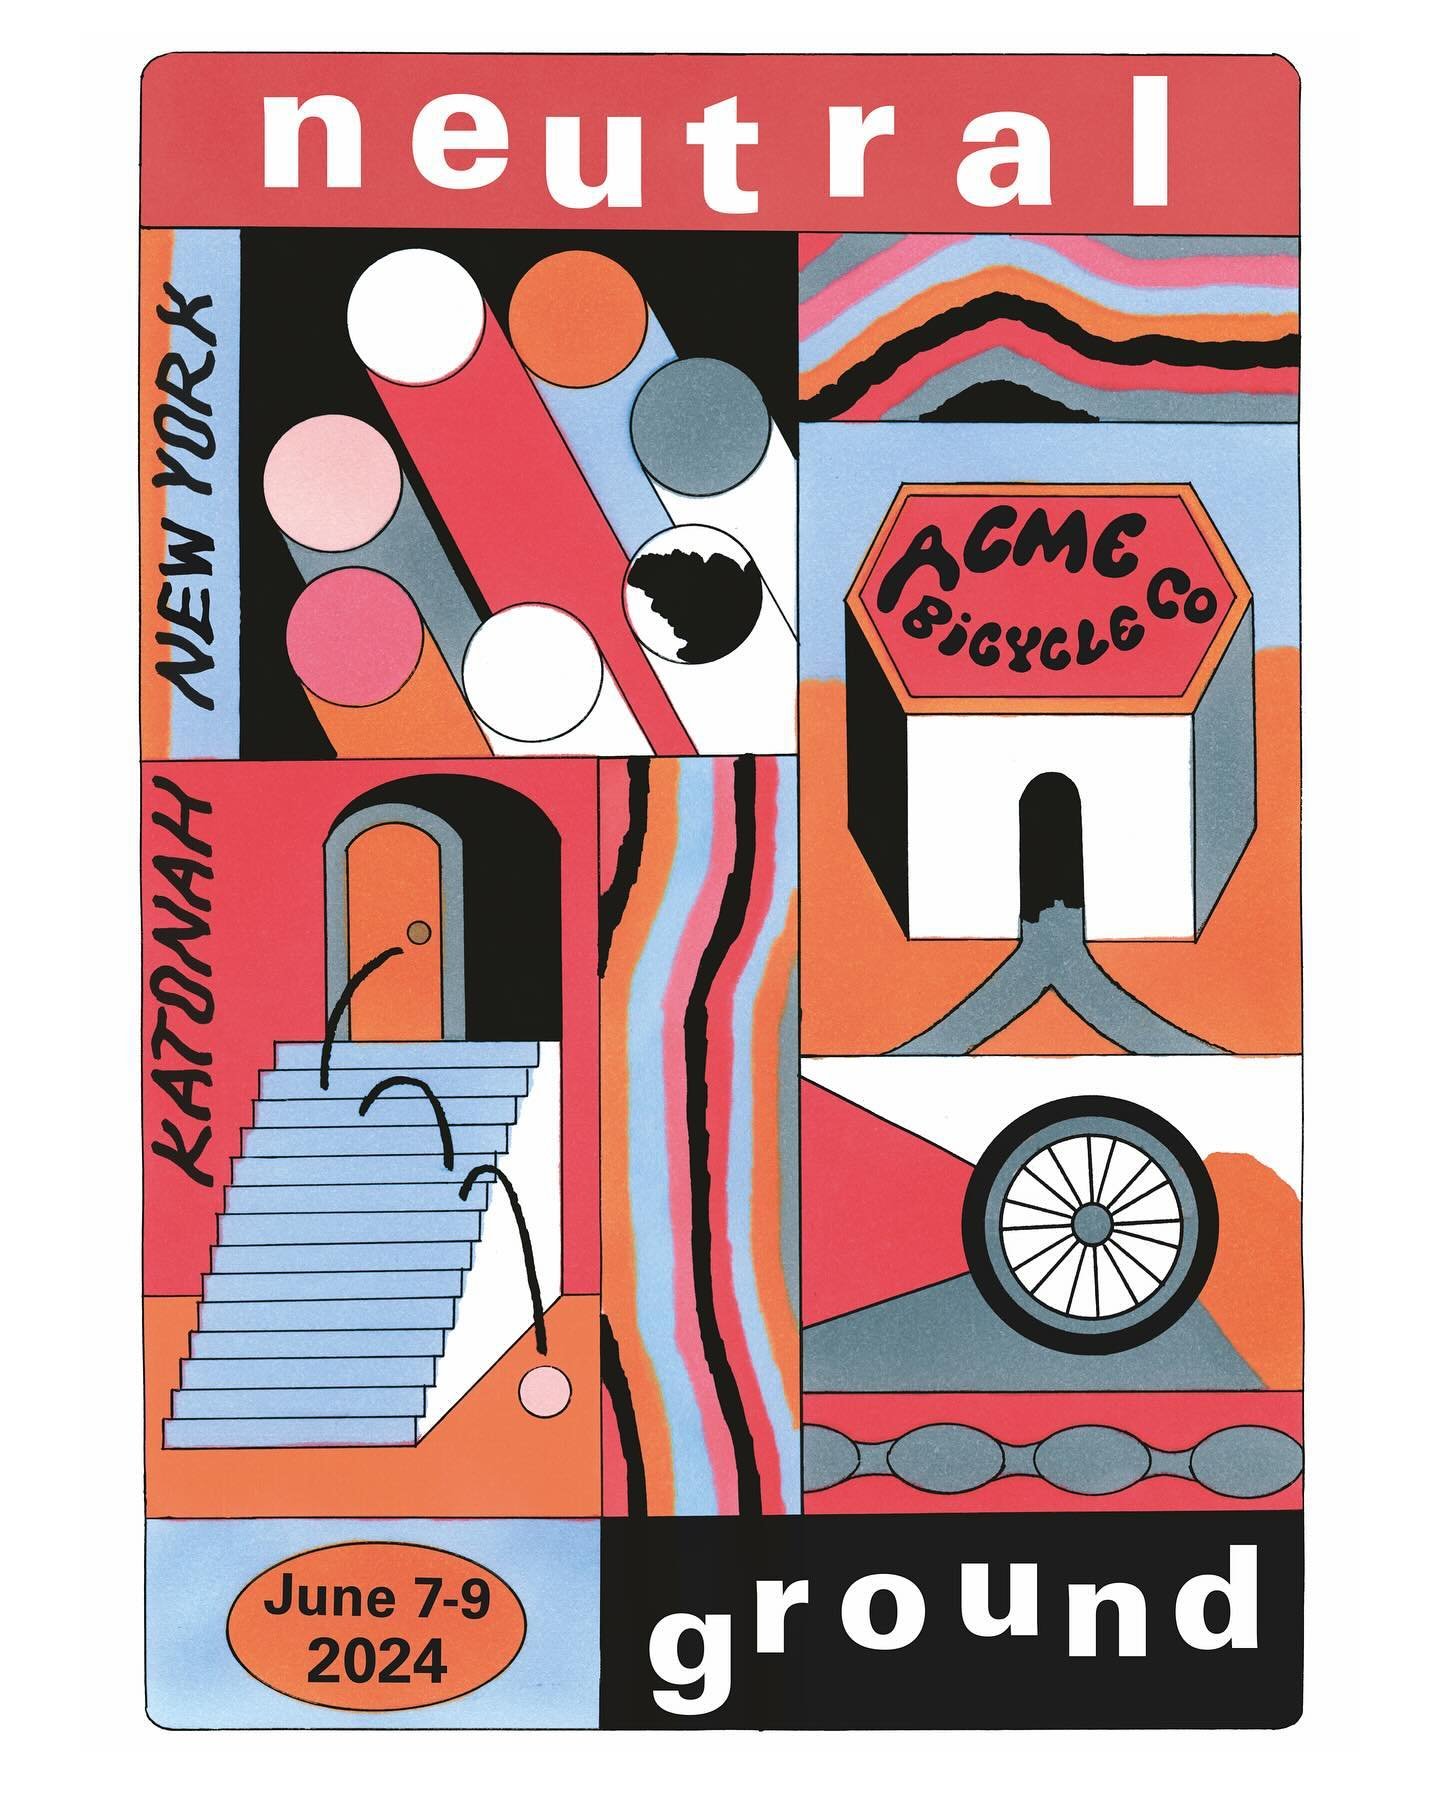 NEUTRAL GROUND 2024: June 7-9

Bicycle expo, product demos, group rides, raffle prizes, music, food + more! 

Vendors: Rapha, SRAM, Factor, No. 22, Moots, Orbea, ENVE / Ceramic Speed, Time, POC / Wolftooth, Maurten, Walk Bike Bedford, Bedford 2030. 
